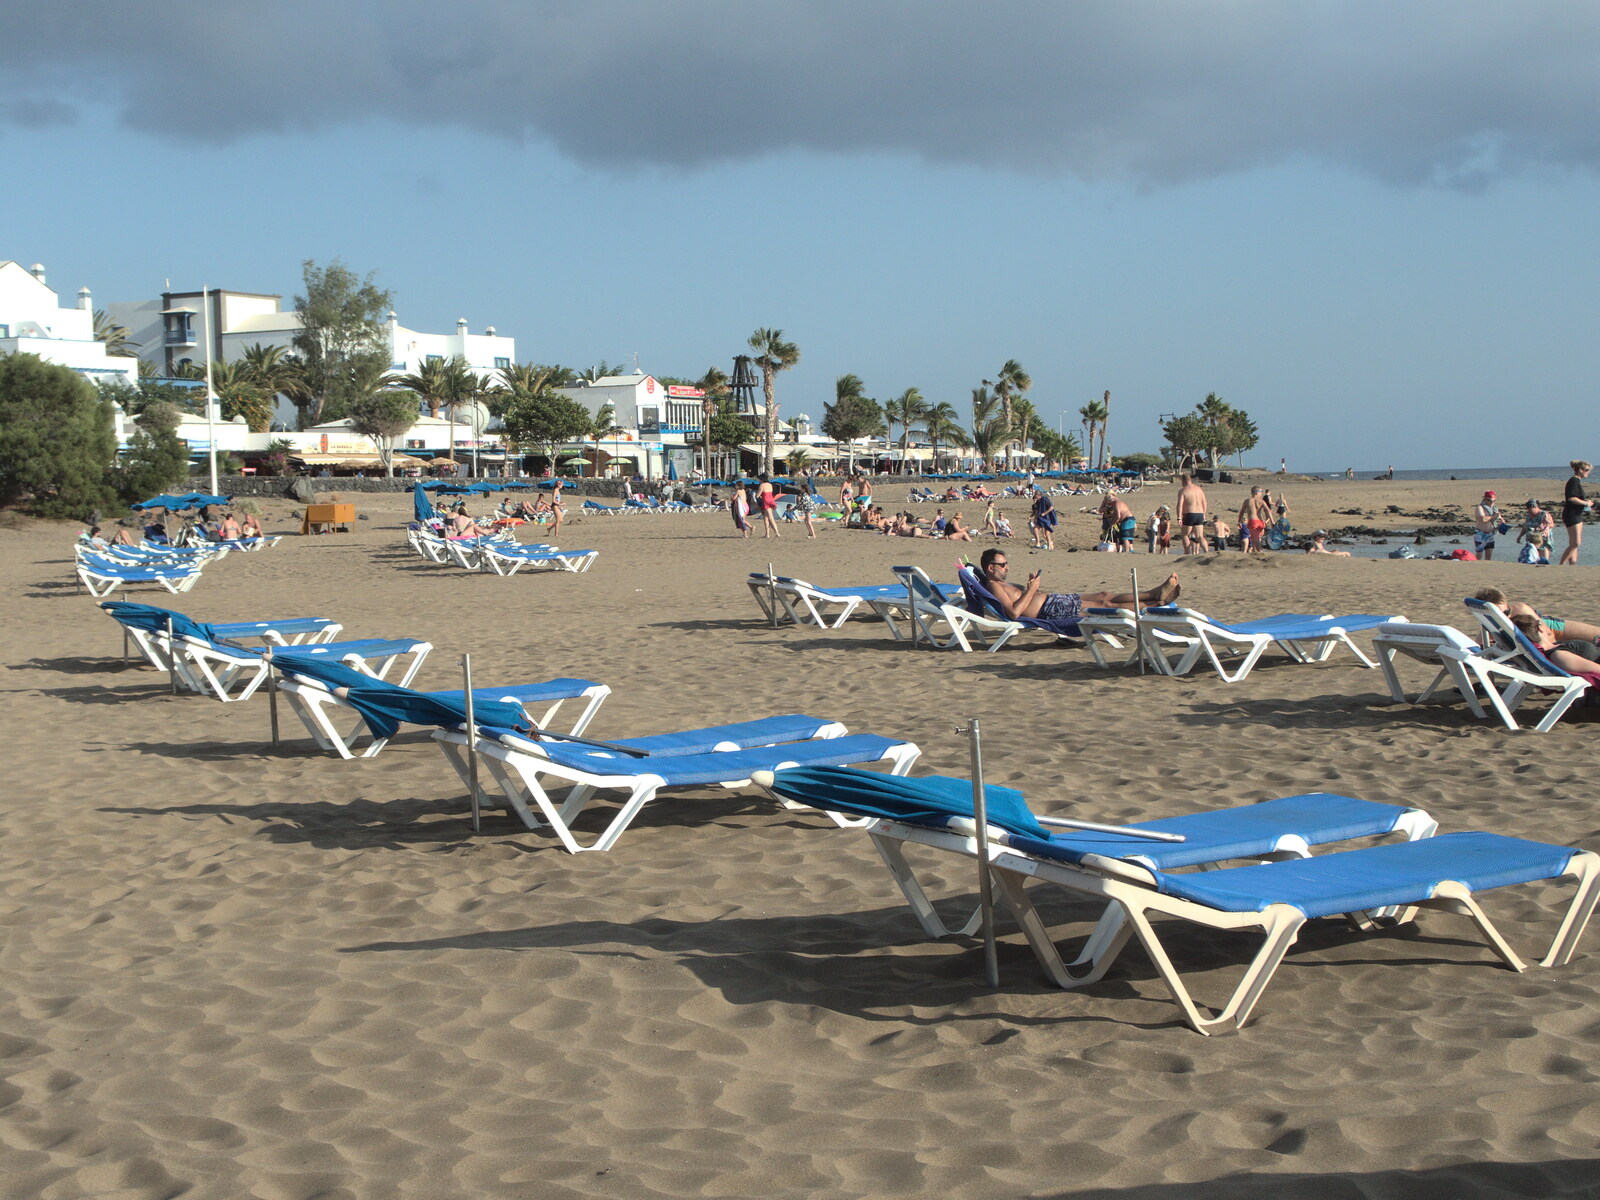 The sunbeds are out for the first time, post Covid from The Volcanoes of Lanzarote, Canary Islands, Spain - 27th October 2021